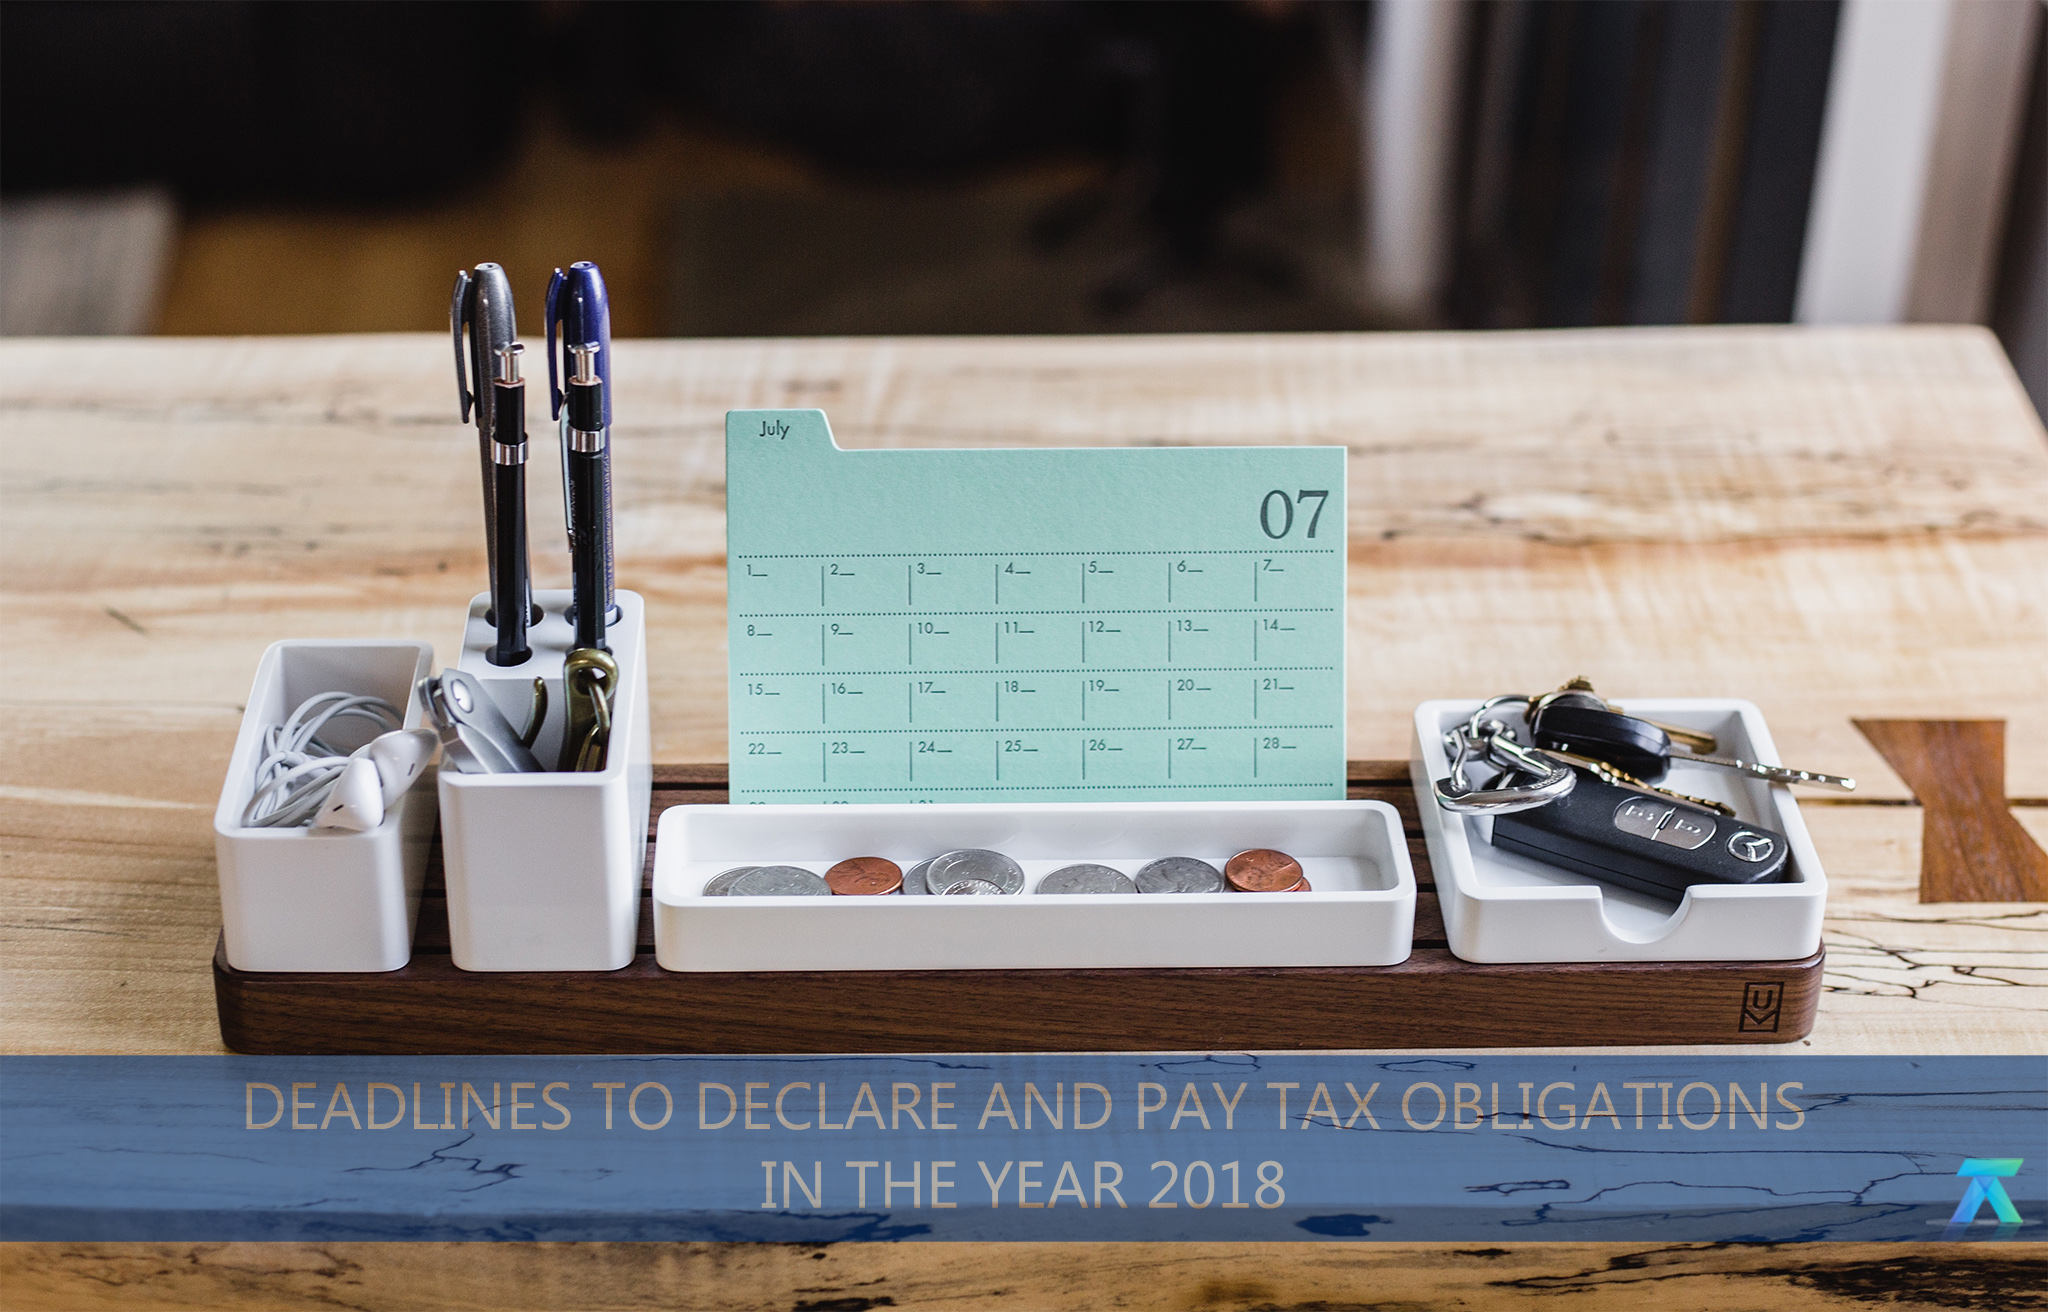 Deadlines to declare and pay tax obligations in the year 2018